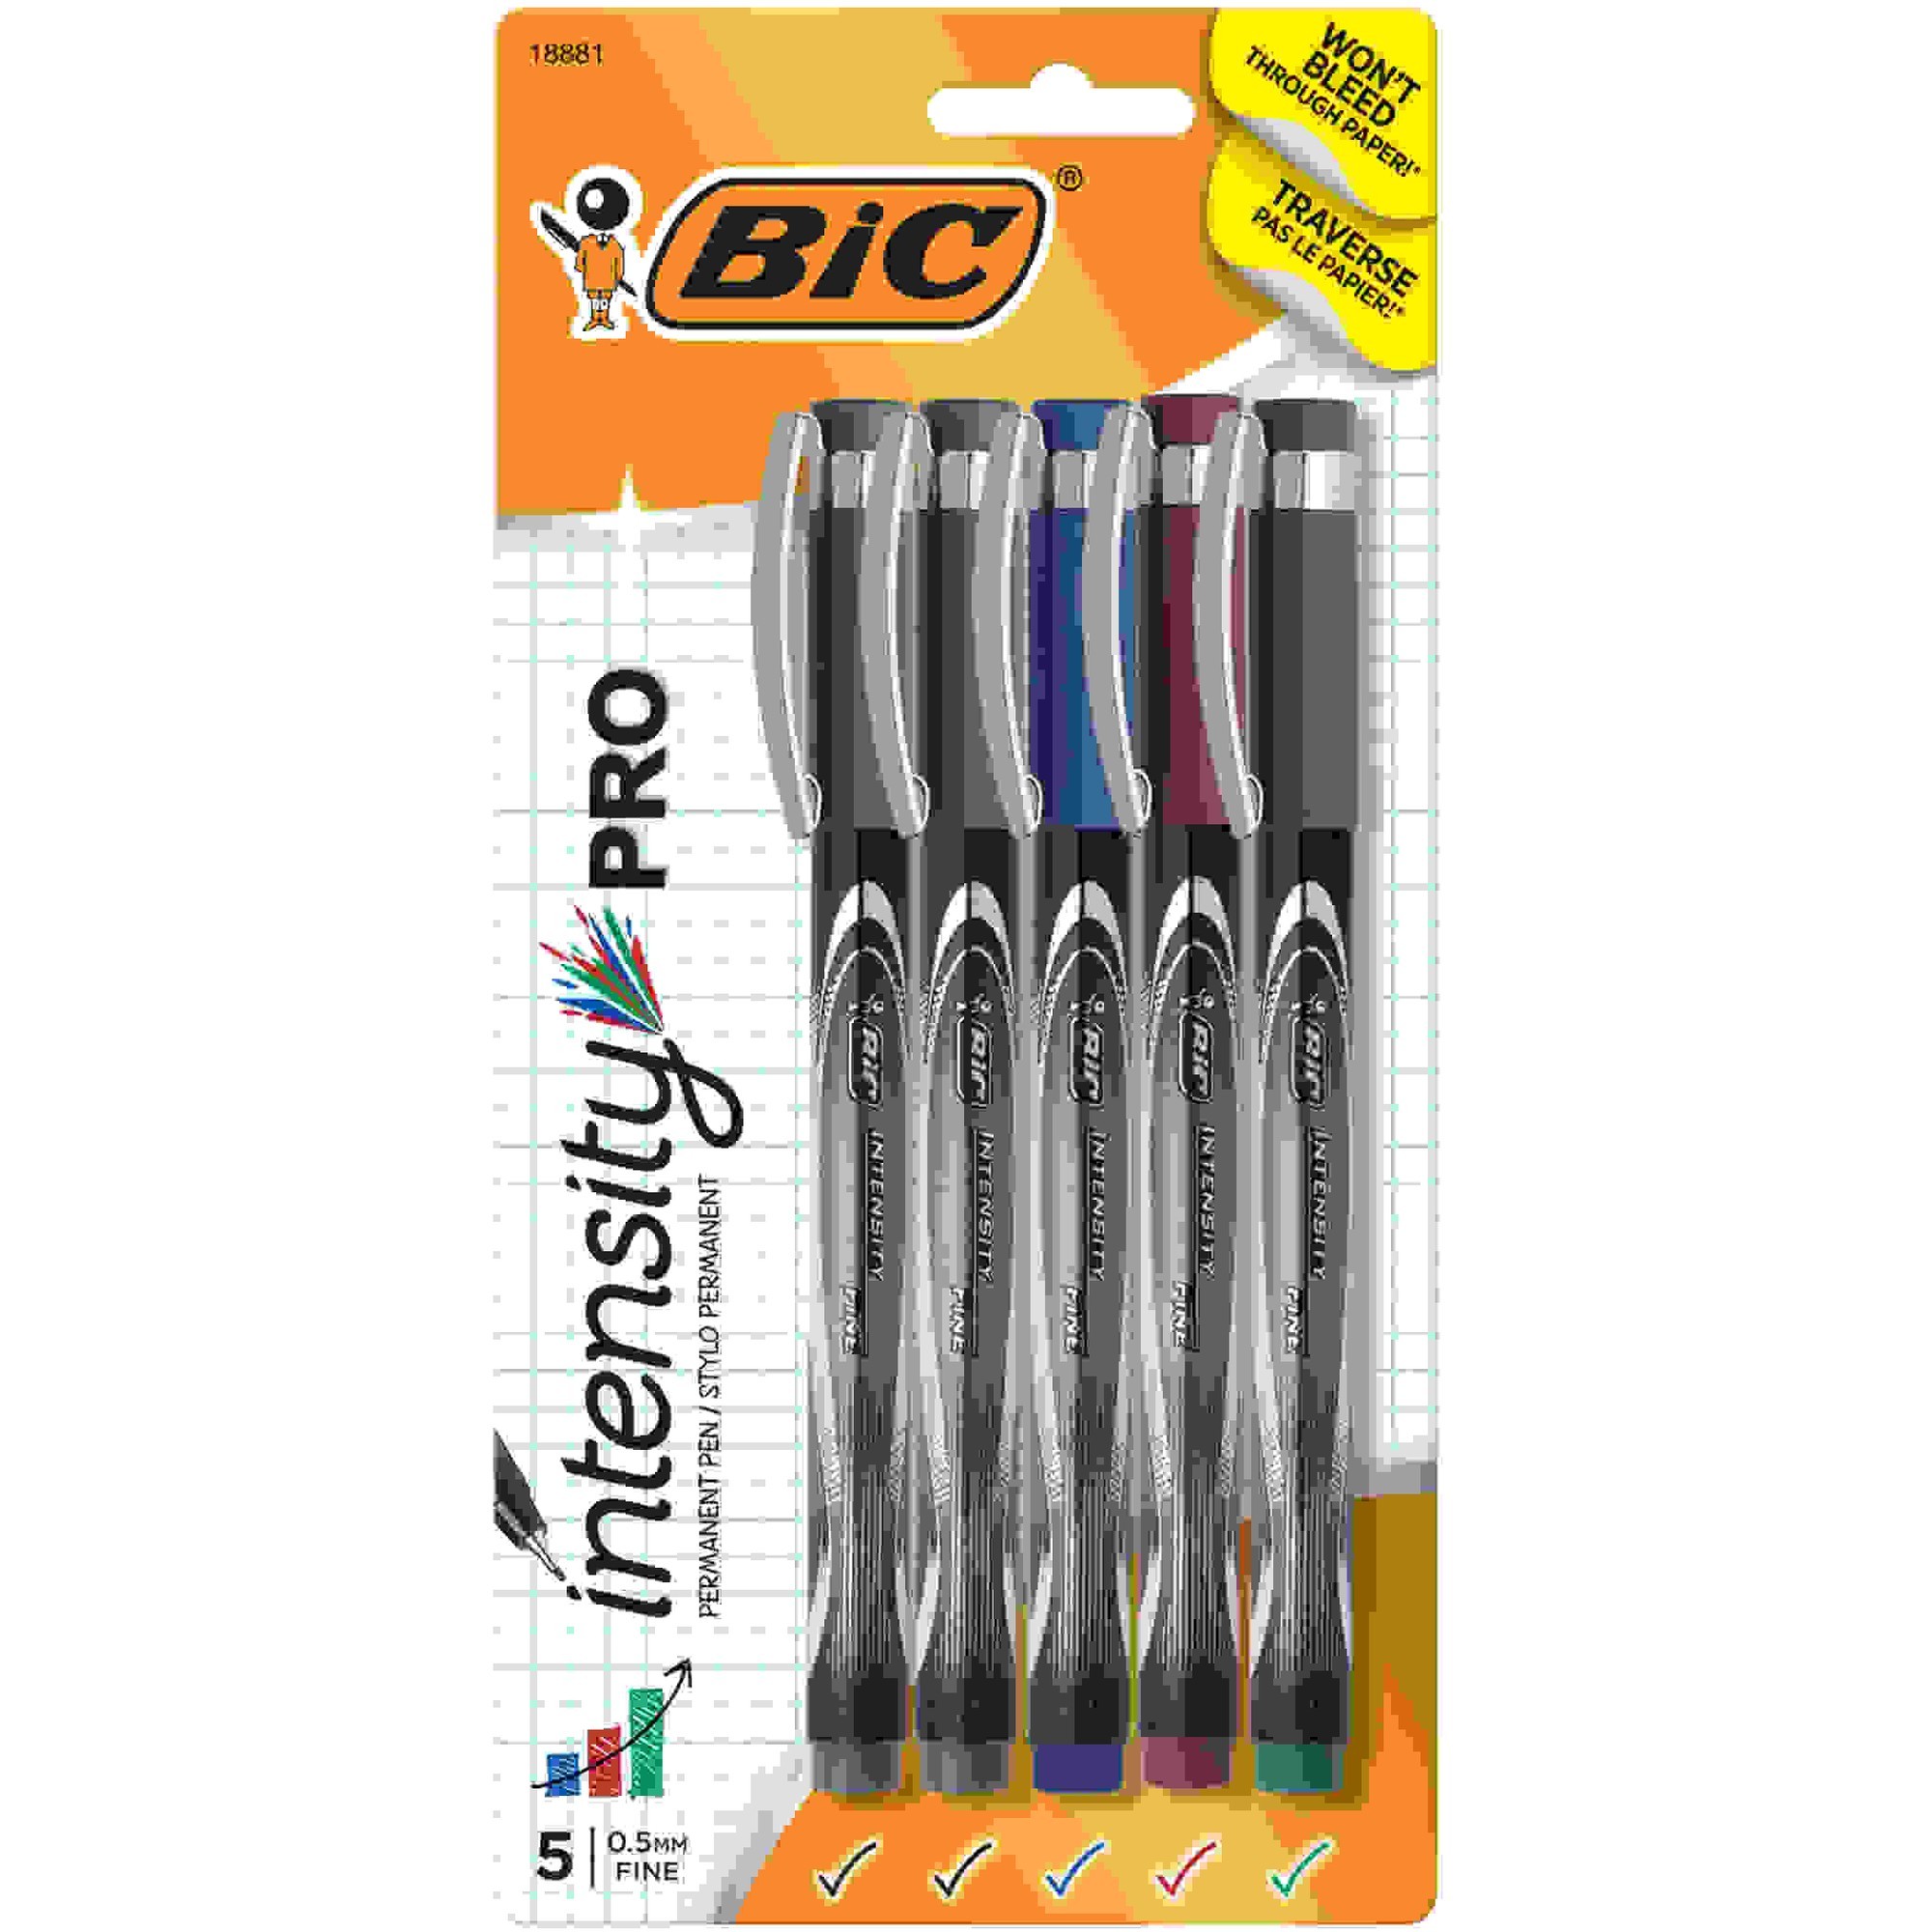 Intensity Pro Marker Pen, Fine Point (0.5mm), Assorted Colors, 5-Count